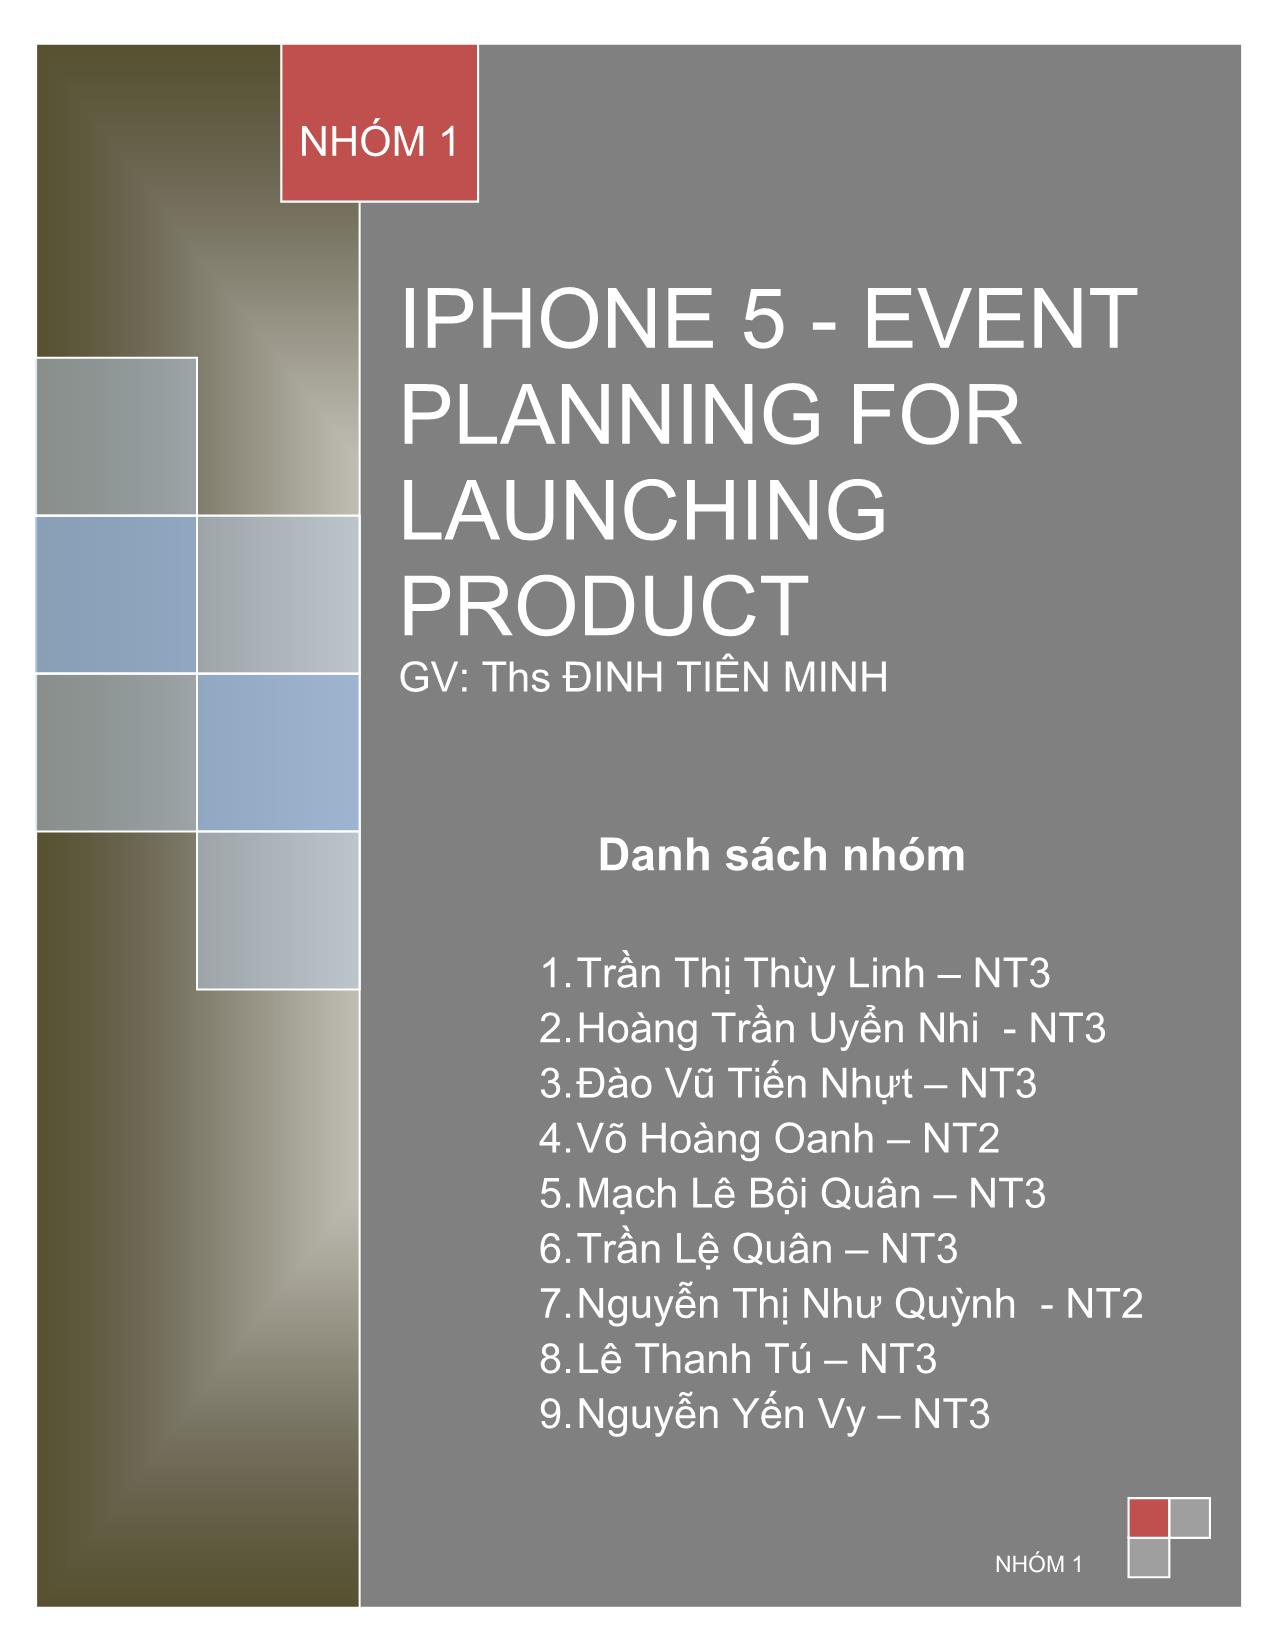 Iphone 5 - Event planning for launching product trang 1